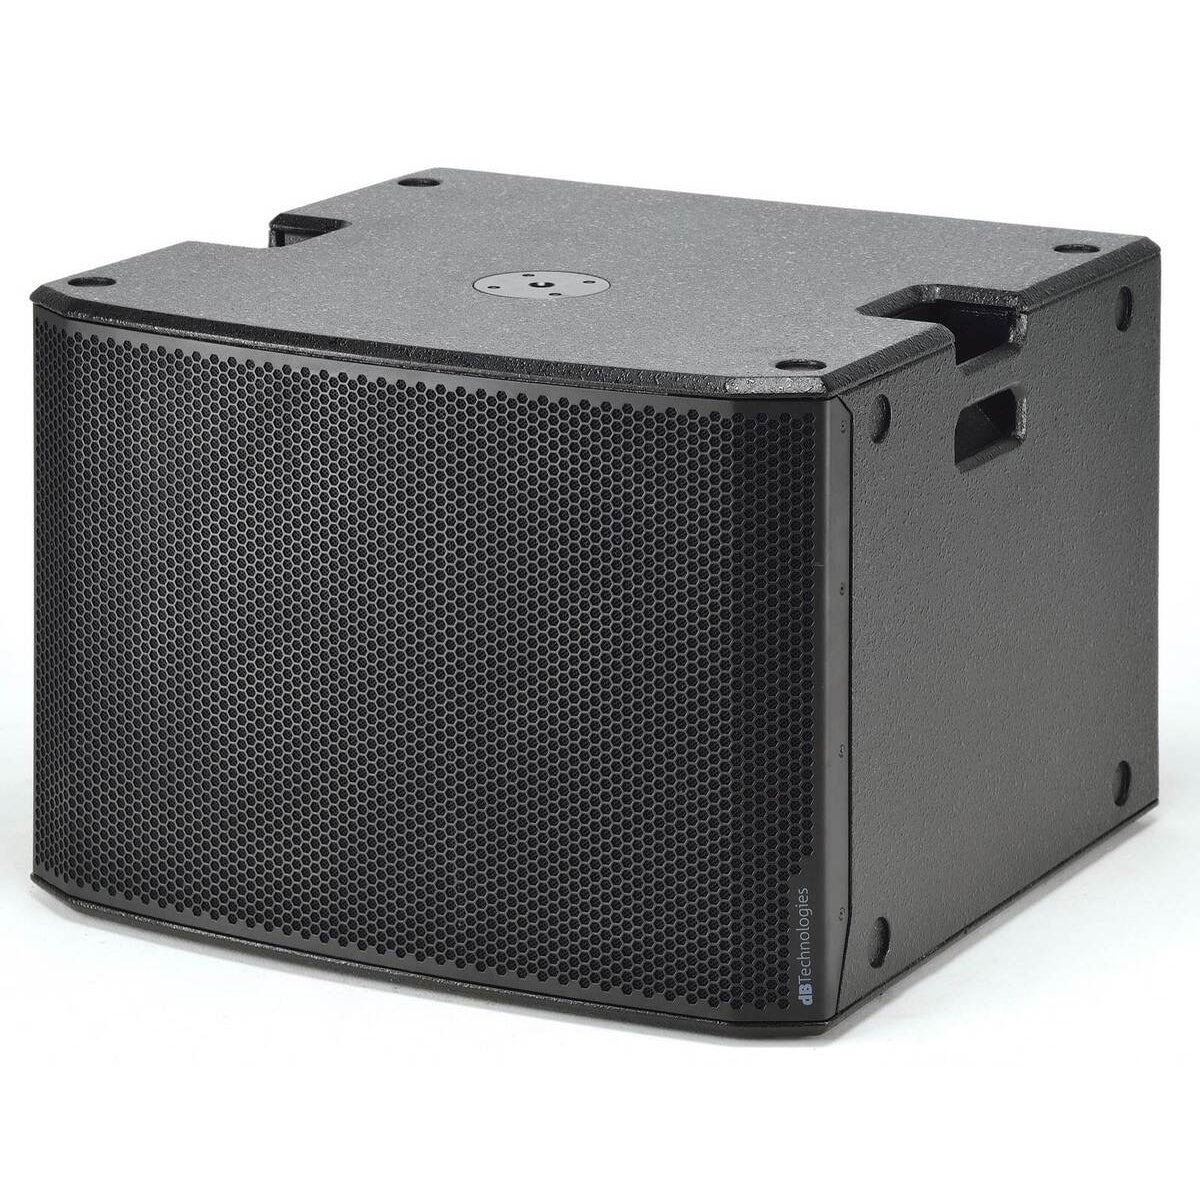 dBTechnologies Sub 918 Active Subwoofer 18inch 900W RMS / 1800W Peak